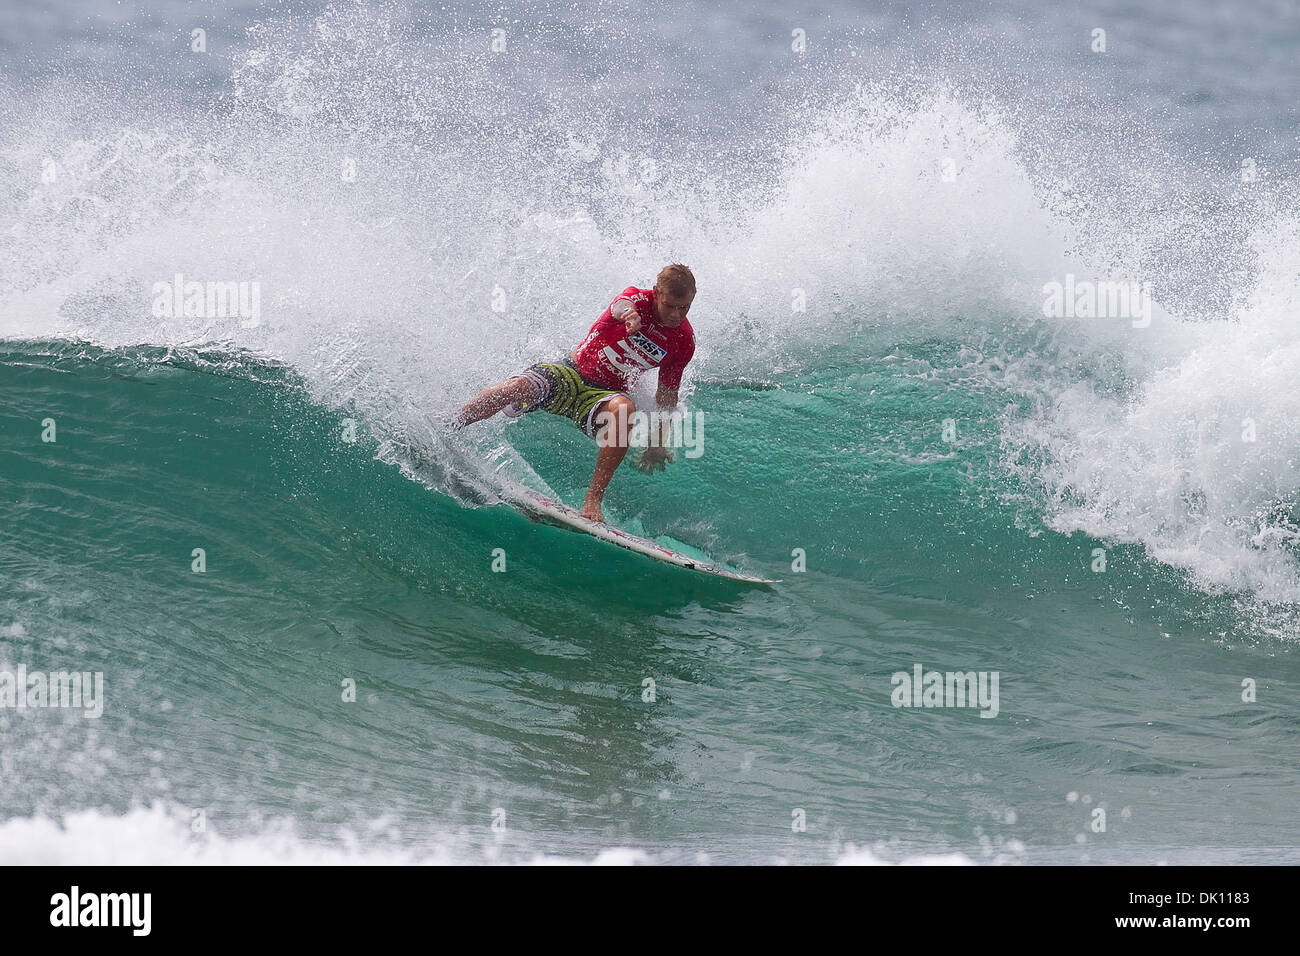 Jan 12, 2011 - Sydney, Australia - Second seed DALE STAPLES (St Frances, South Africa) advanced into the quarterfinals of the Billabong ASP World Junior Championships at Sydney's North Narrabeen Beach in Australia (Credit Image: © Kirstin Scholtz/ASP-Covered Images/ZUMAPRESS.com) Stock Photo